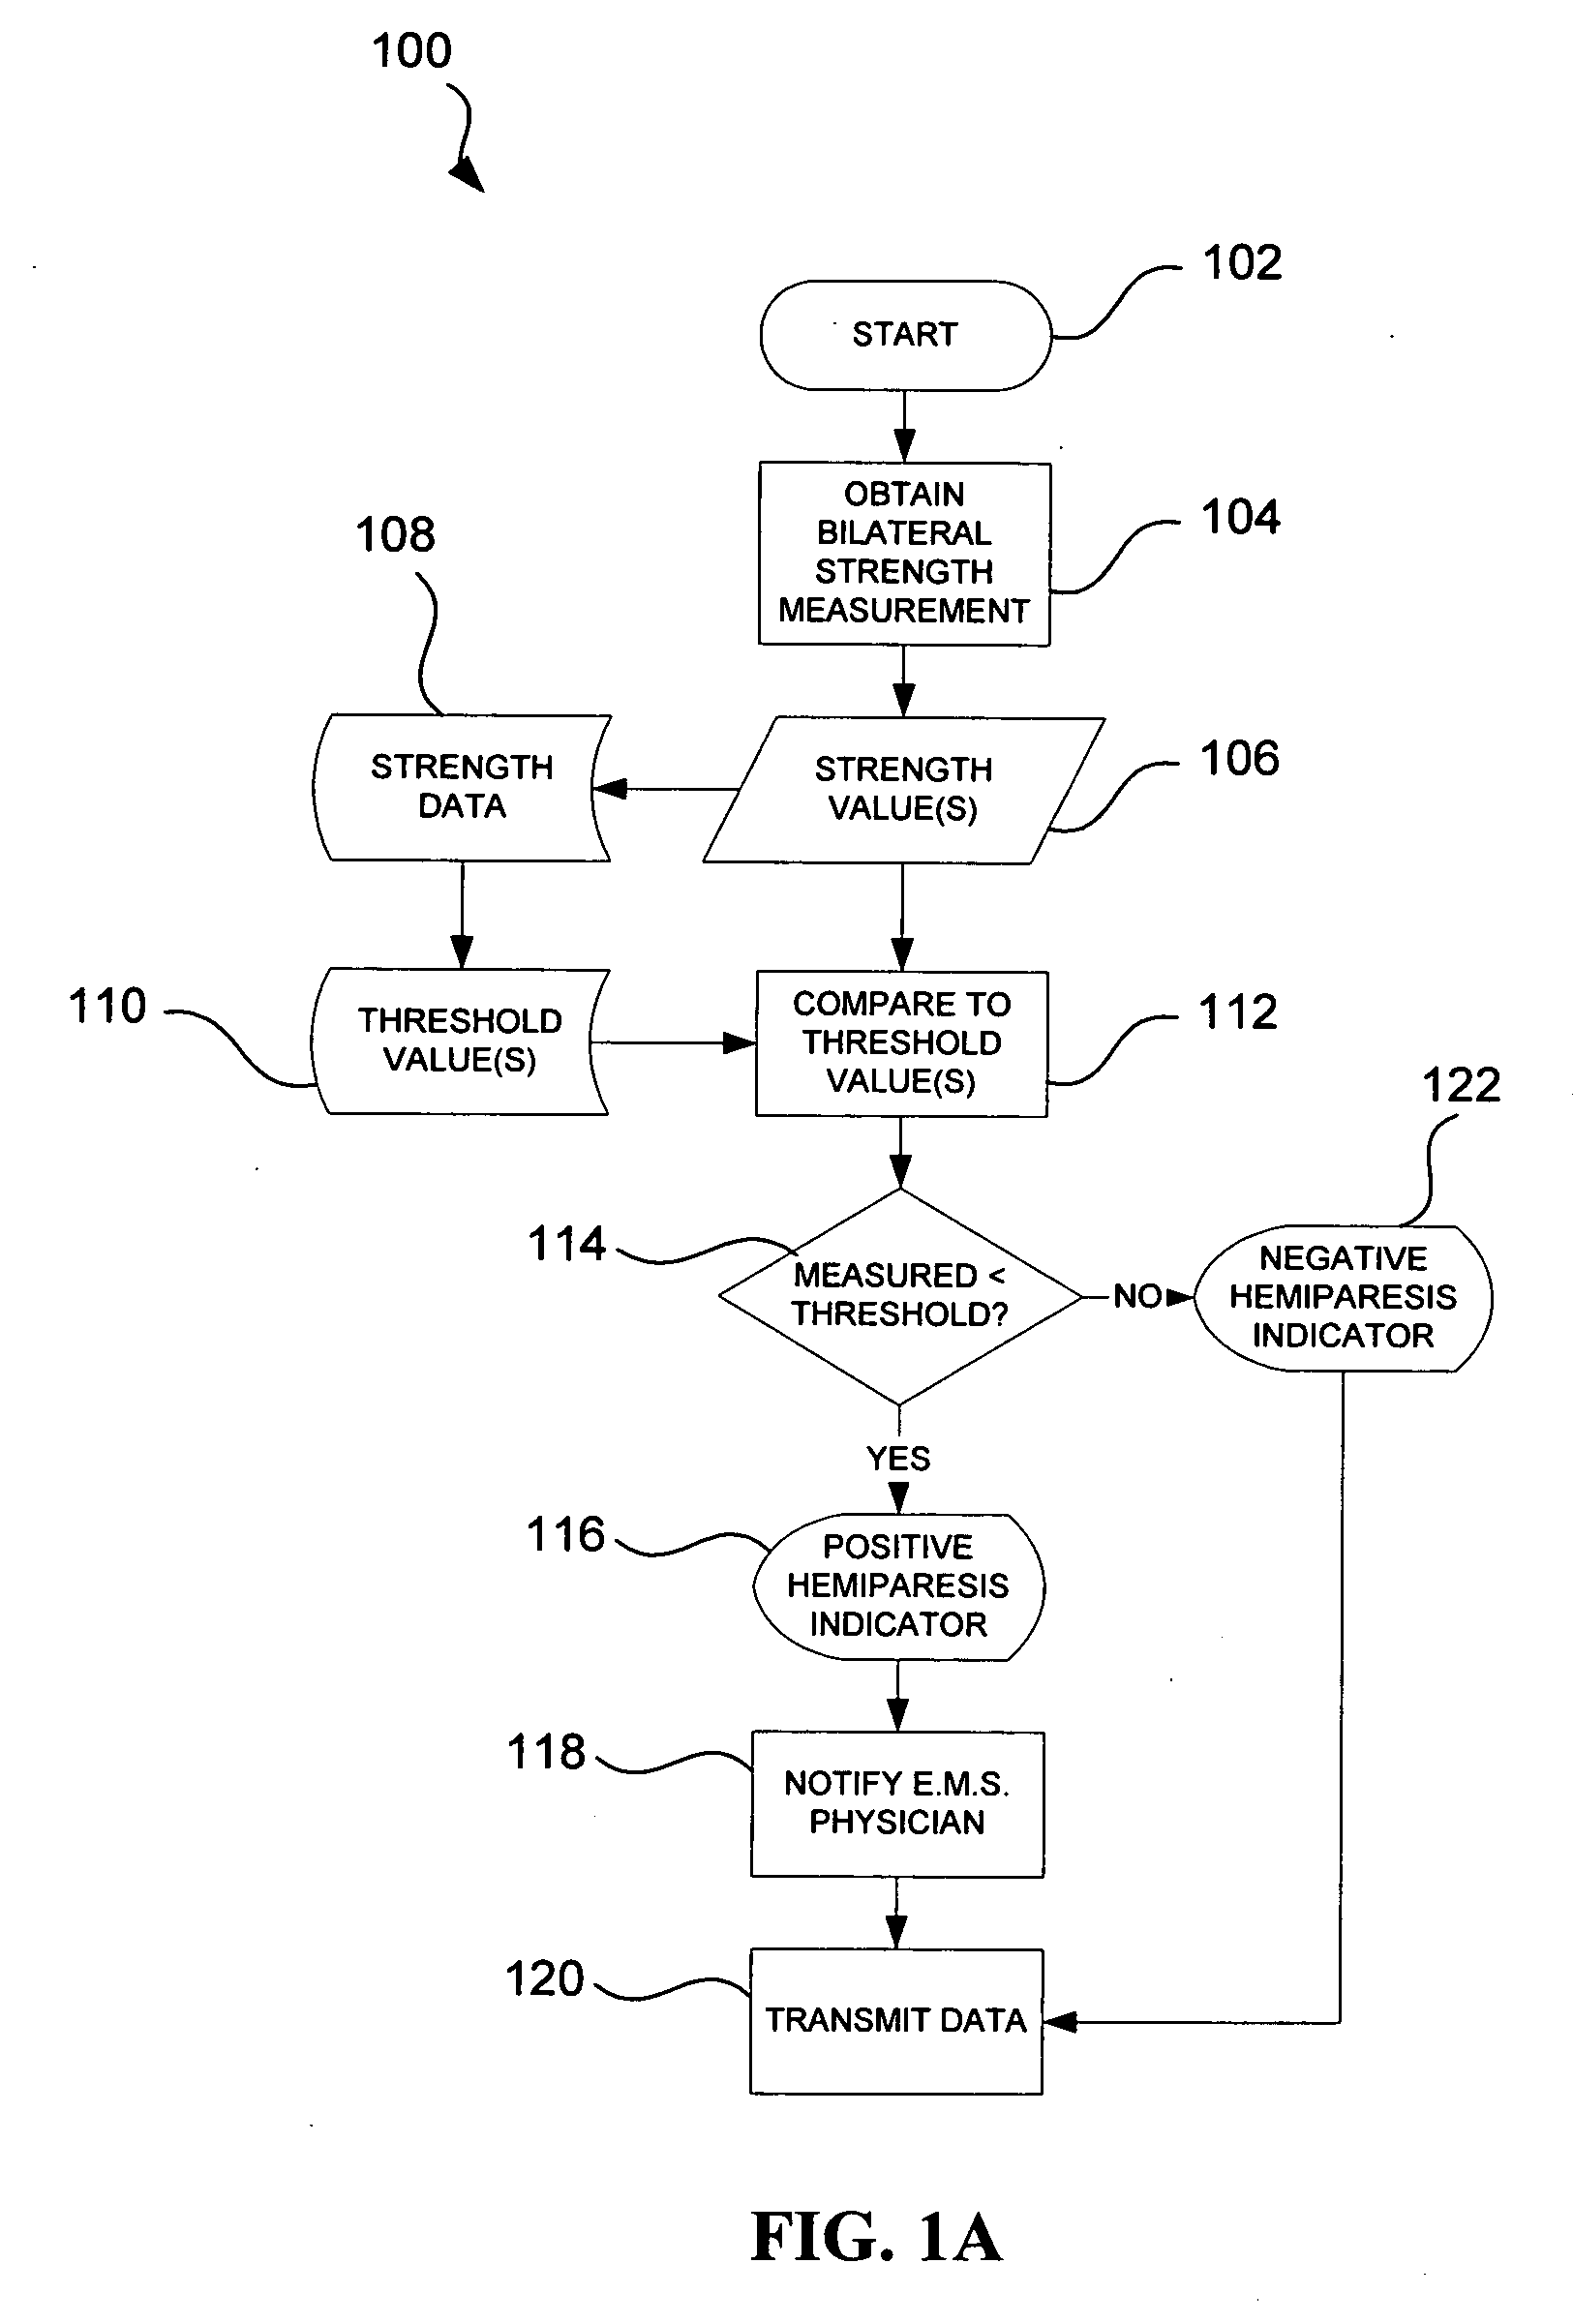 Stroke symptom recognition devices and methods